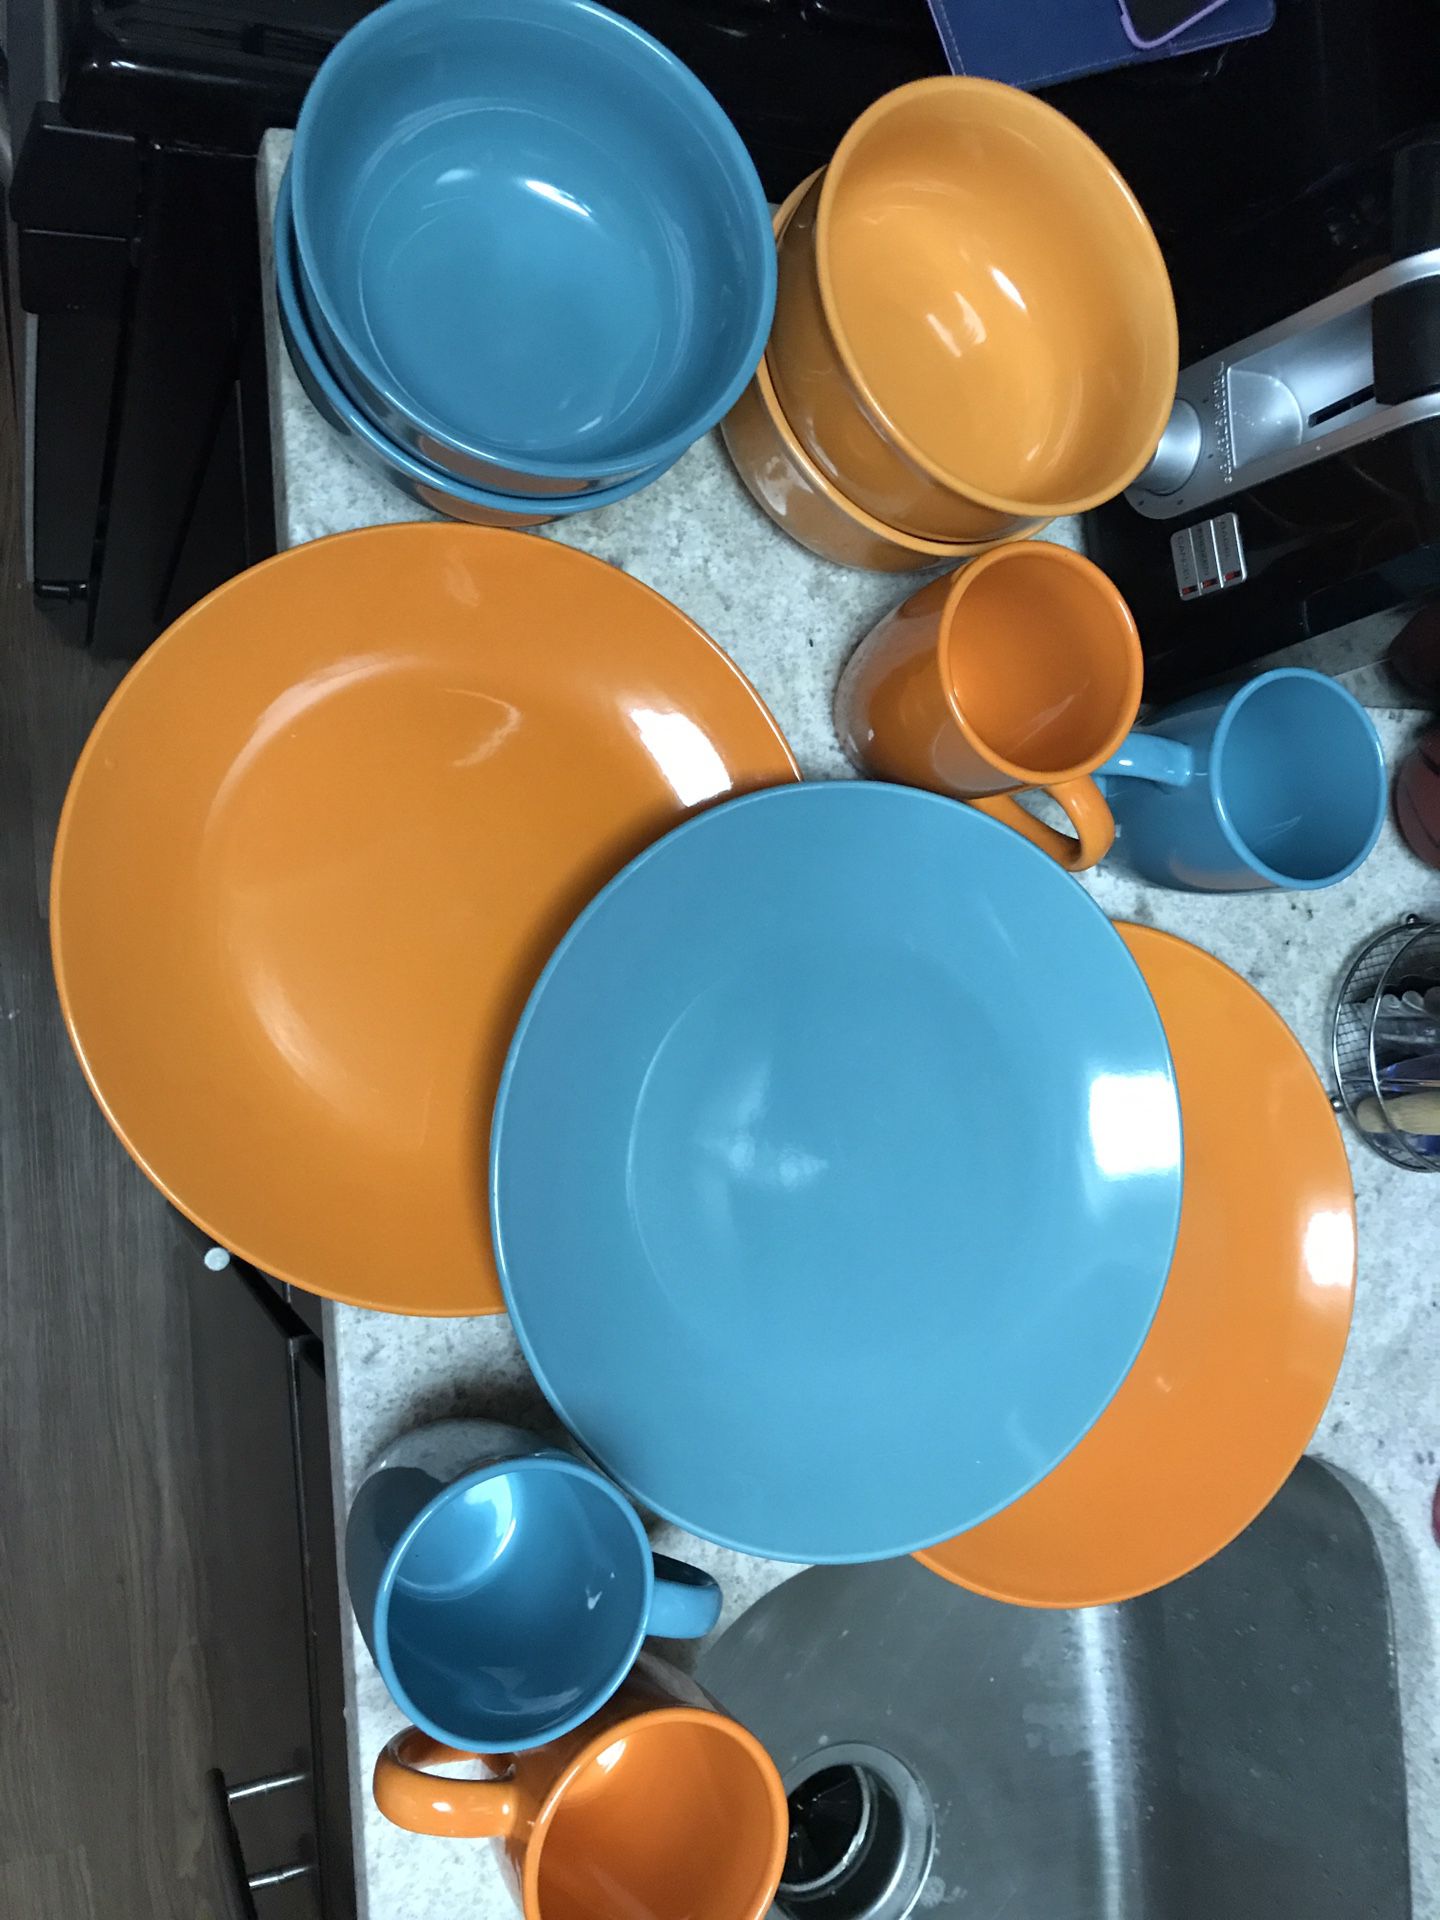 Porcelain Blue and Orange Dinner Plate, Bowl, Coffee Cup Set